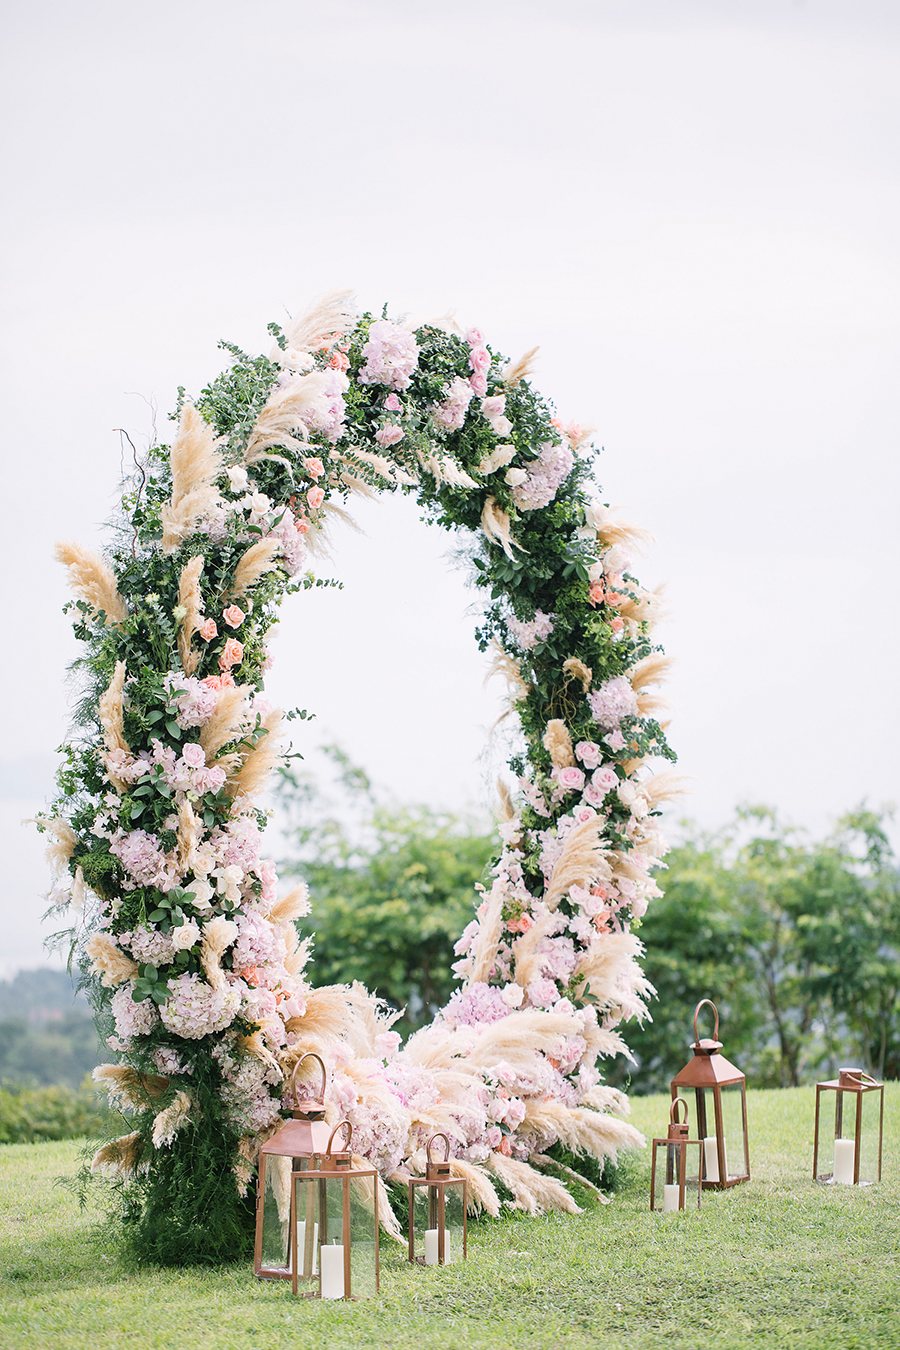 Circular wedding ceremony arch with blush flowers, greeneries and pampas grass.